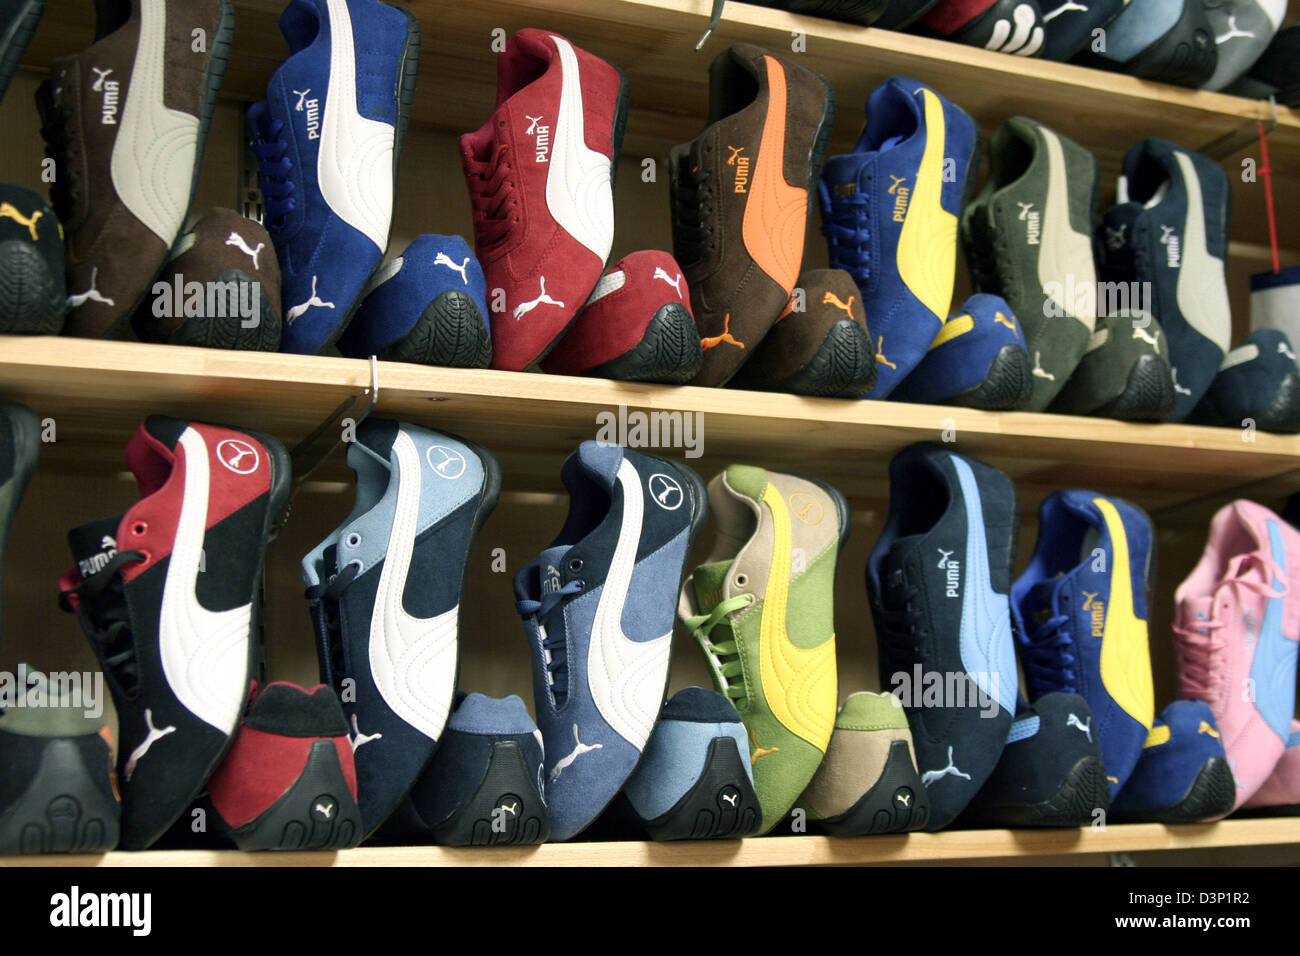 Puma sneakers in different colours are for sale in a store in Beijing, China, 30 June But since the price is only 14 euros for each pair it seems that the